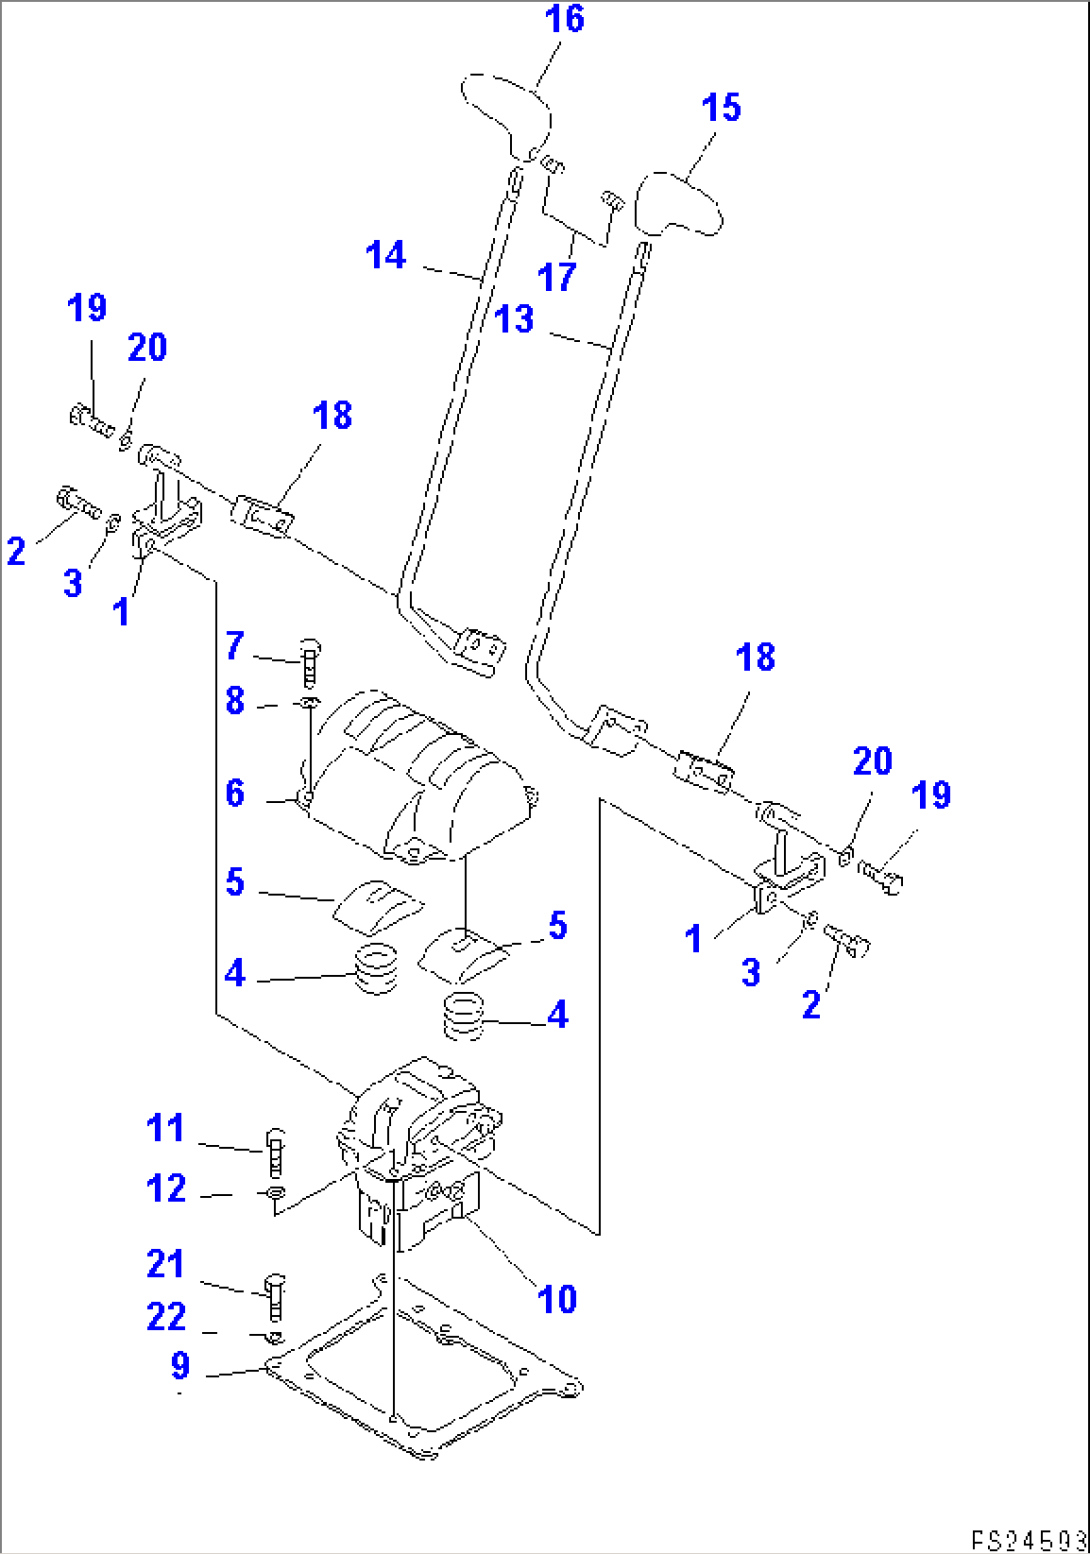 TRAVEL CONTROL LEVER AND LINKAGE(#1002-1100)